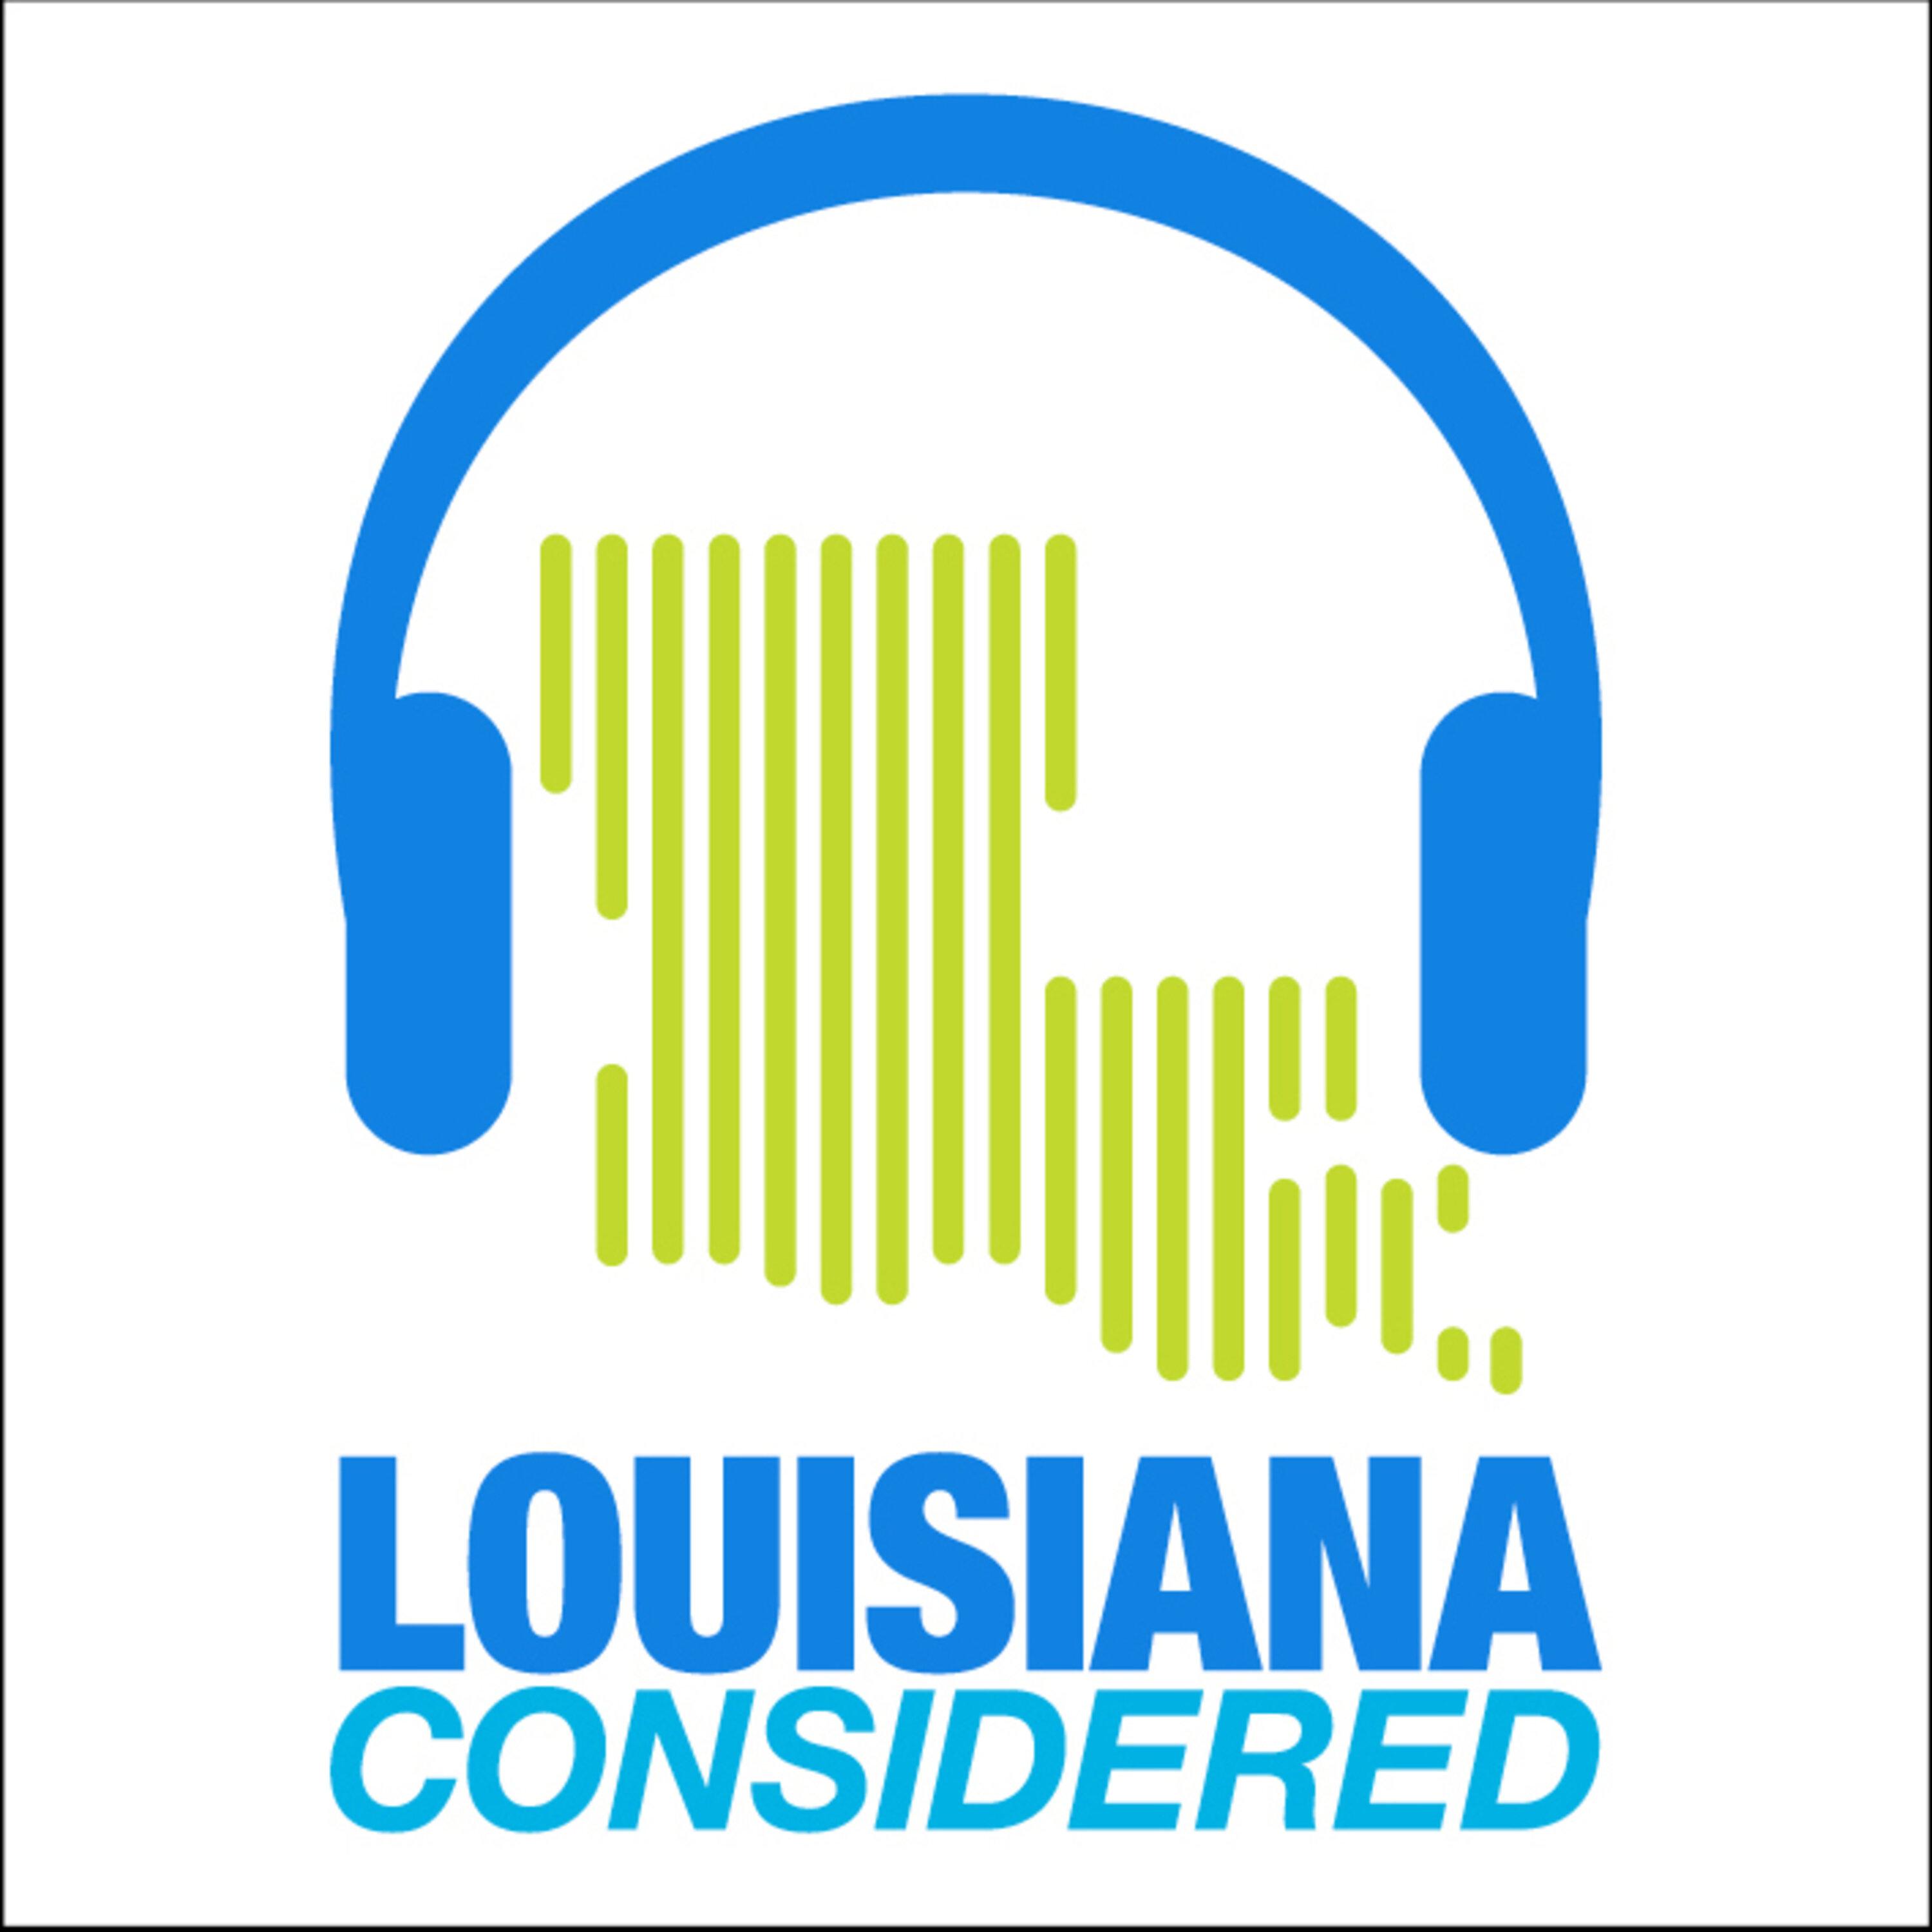 Thumbnail for "Louisiana Considered: Enabling vaccine access for Black Louisianans".